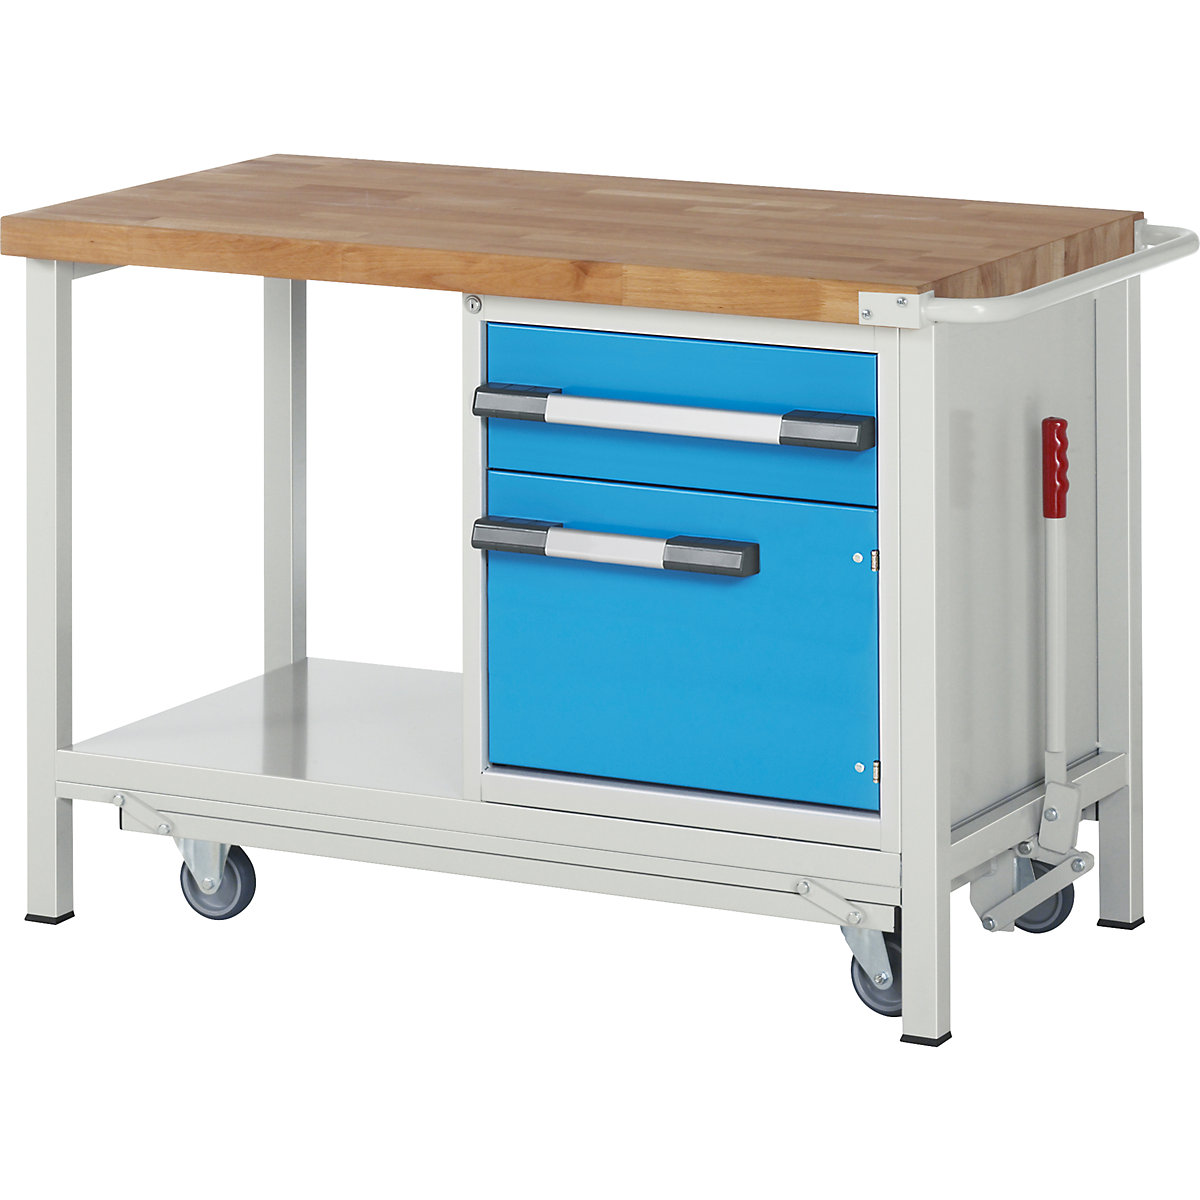 Mobile and lowerable workbench, Series 8 frame construction – eurokraft pro, 1 drawer, 1 door, storage shelf, WxD 1250 x 700 mm-6